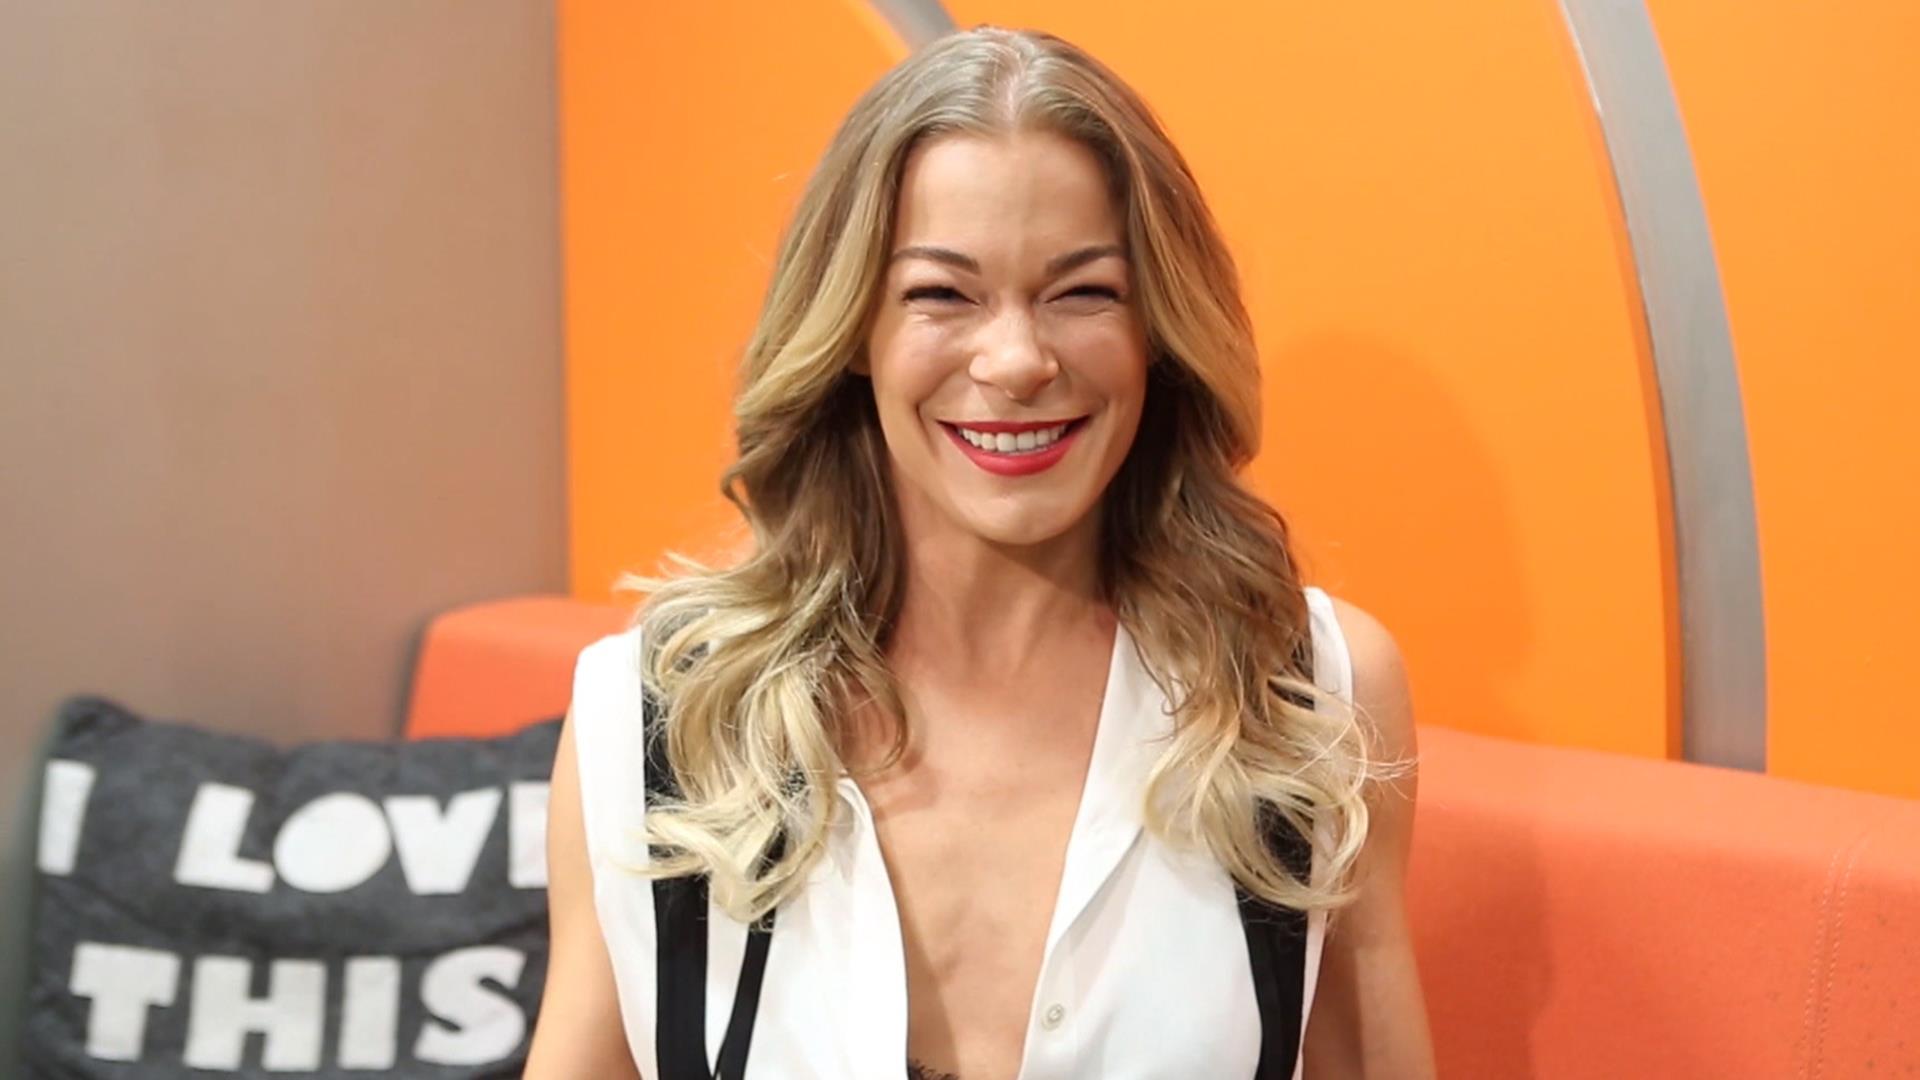 LeAnn Rimes reveals psoriasis flare-up in powerful photo shoot